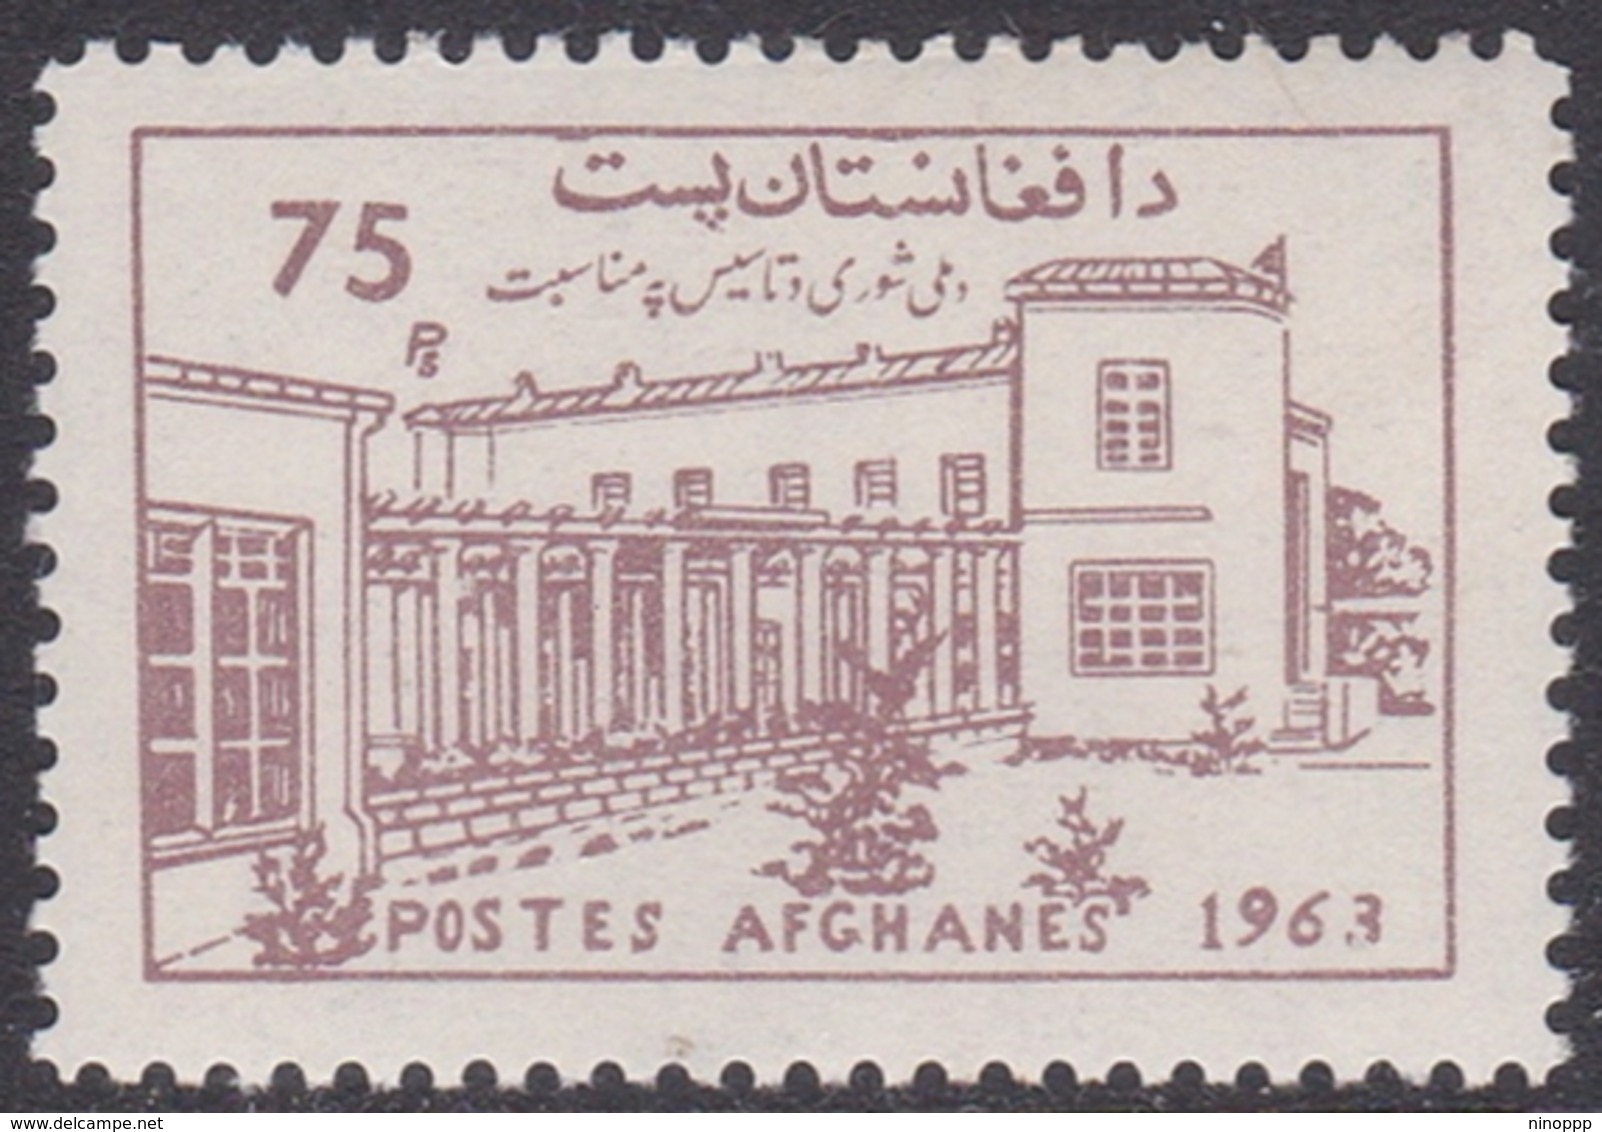 Afghanistan, Scott 659 1963 National Assembly Building 75p Brown, Mint Never Hinged - Afghanistan